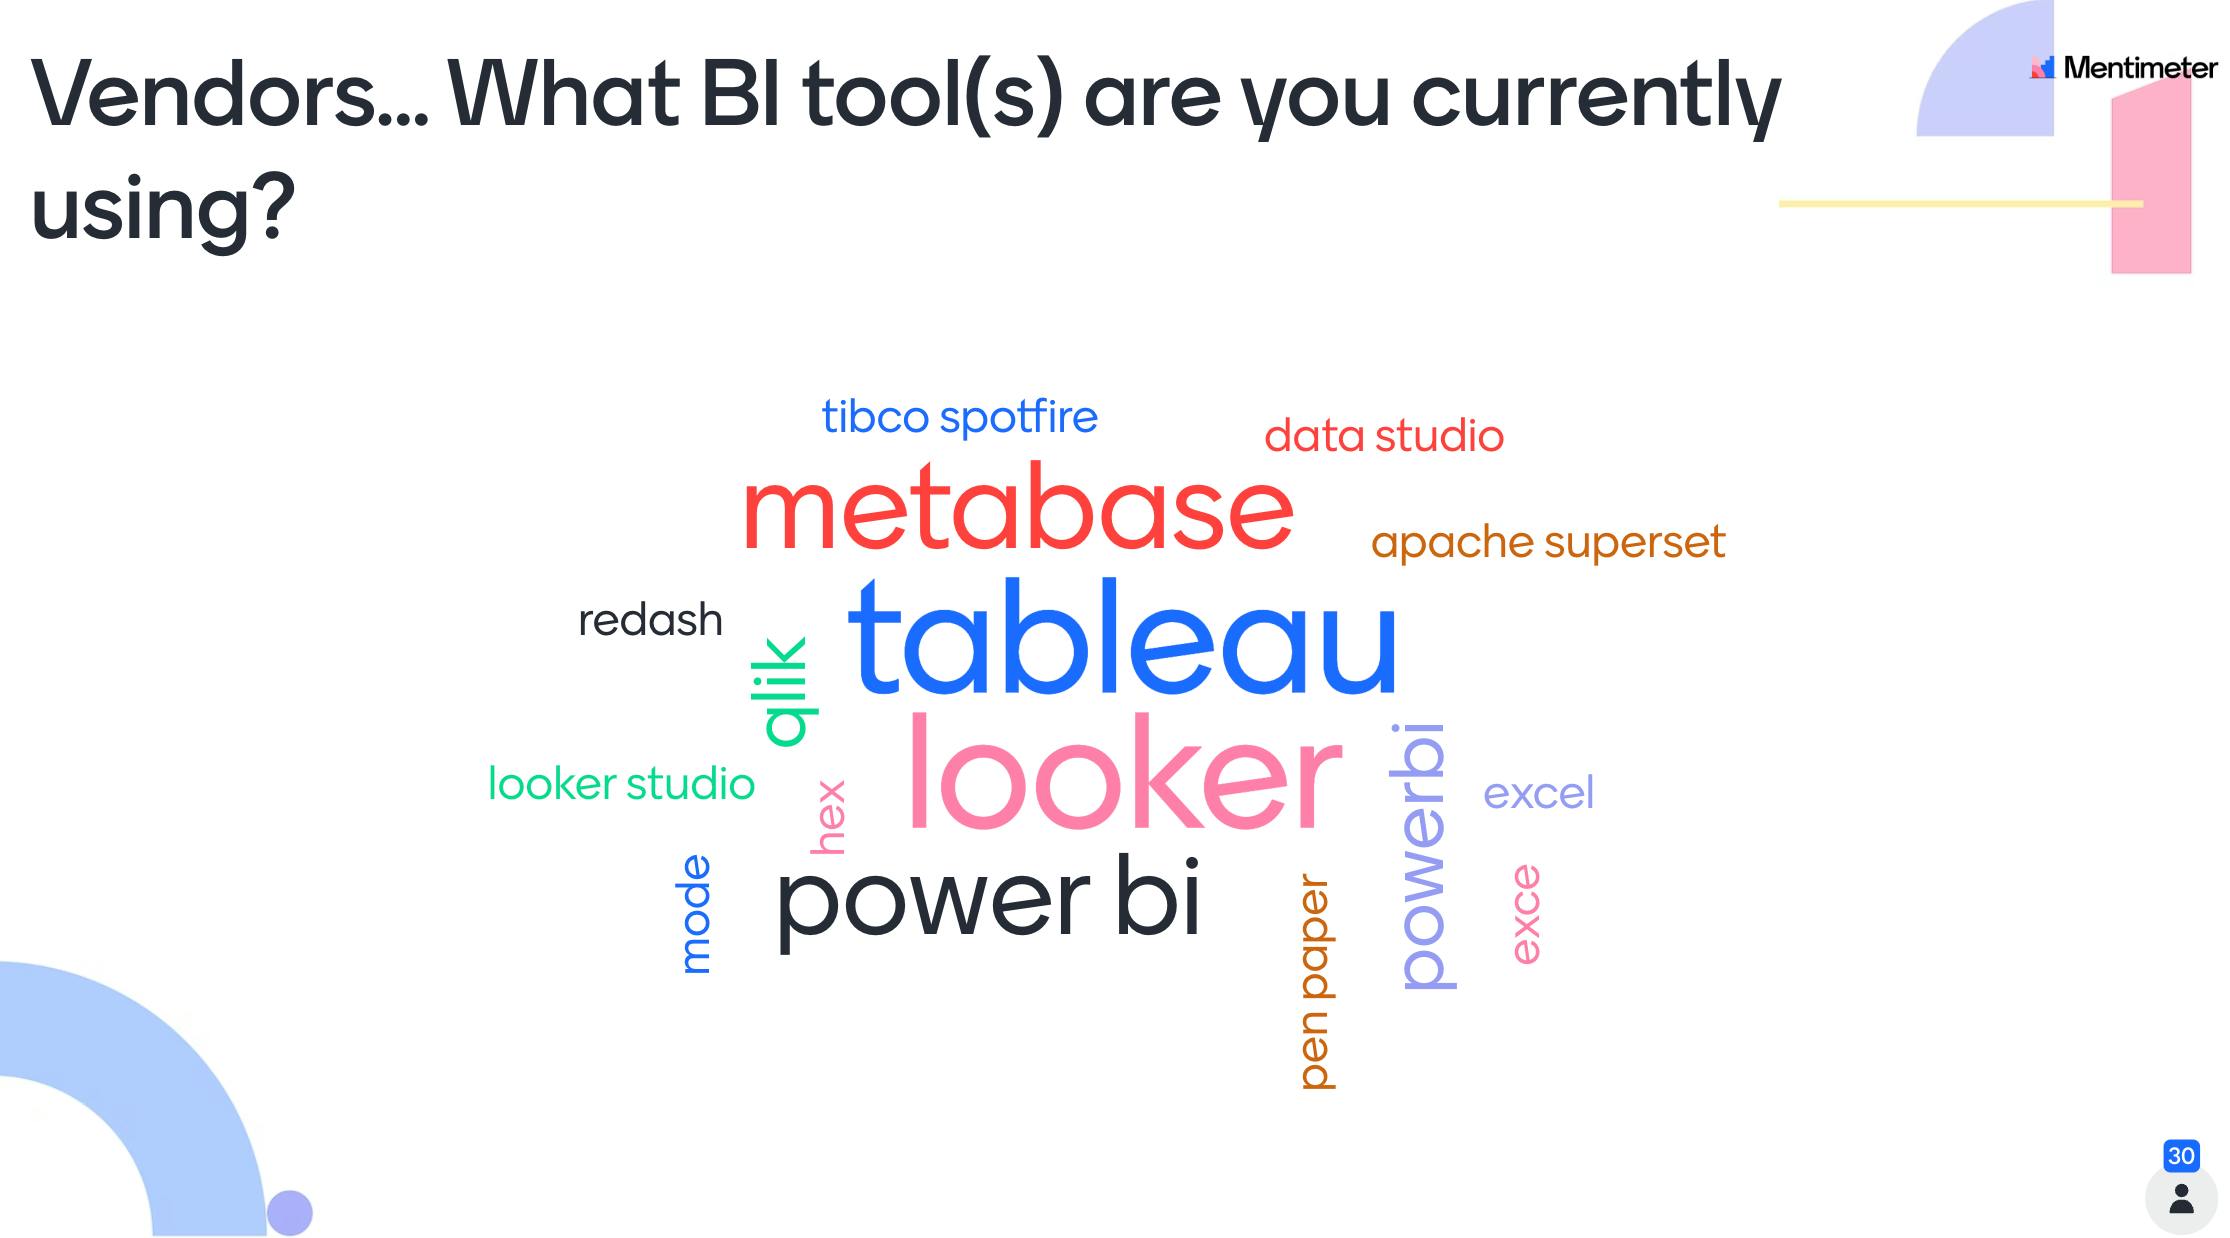 The BI tools used by members of the audience.